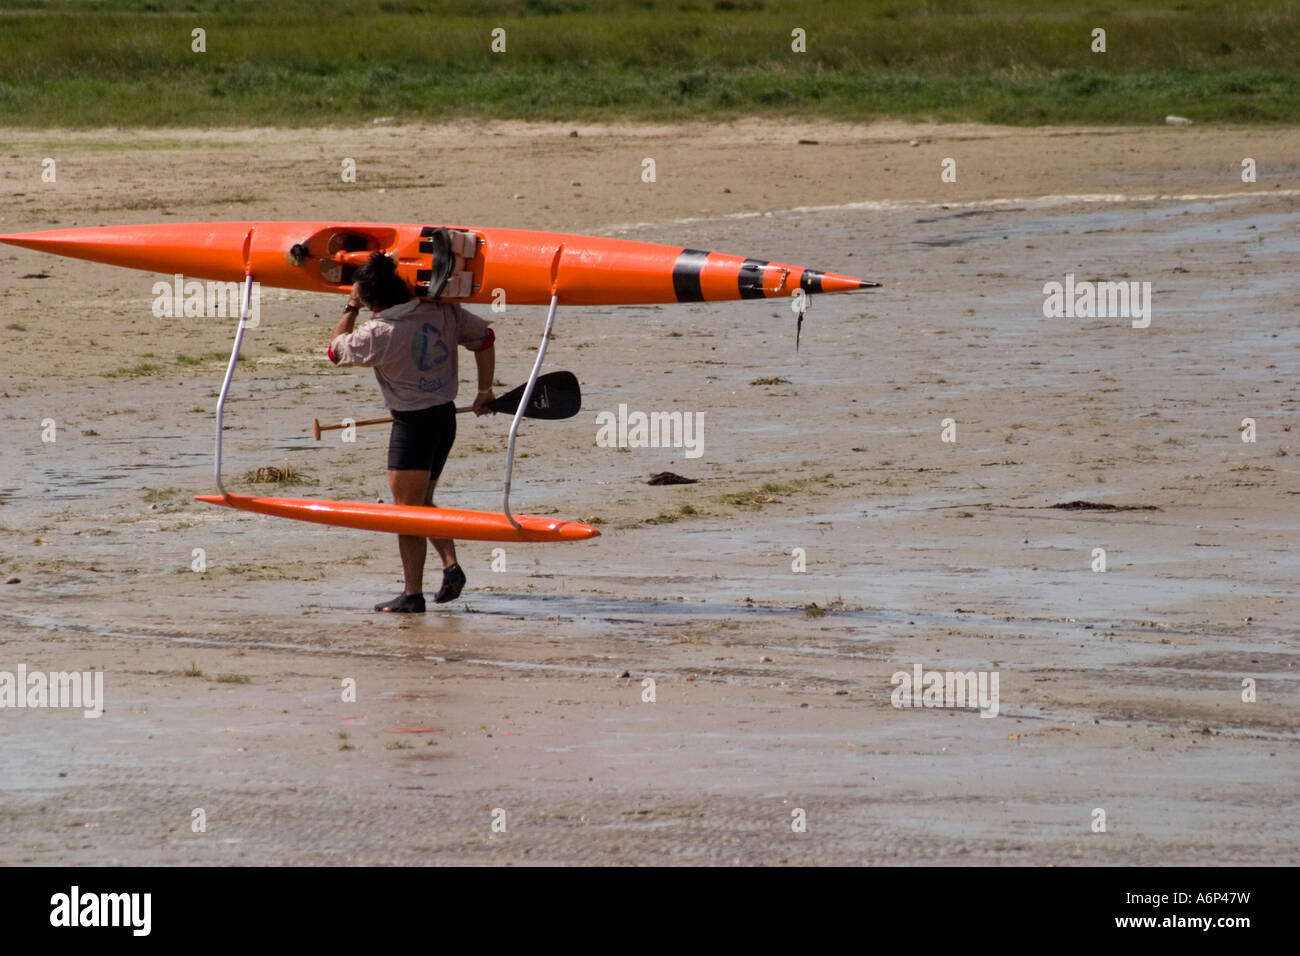 Man carrying outrigger canoe back up beach from river St Valery sur Somme  Somme Picardy France Stock Photo - Alamy